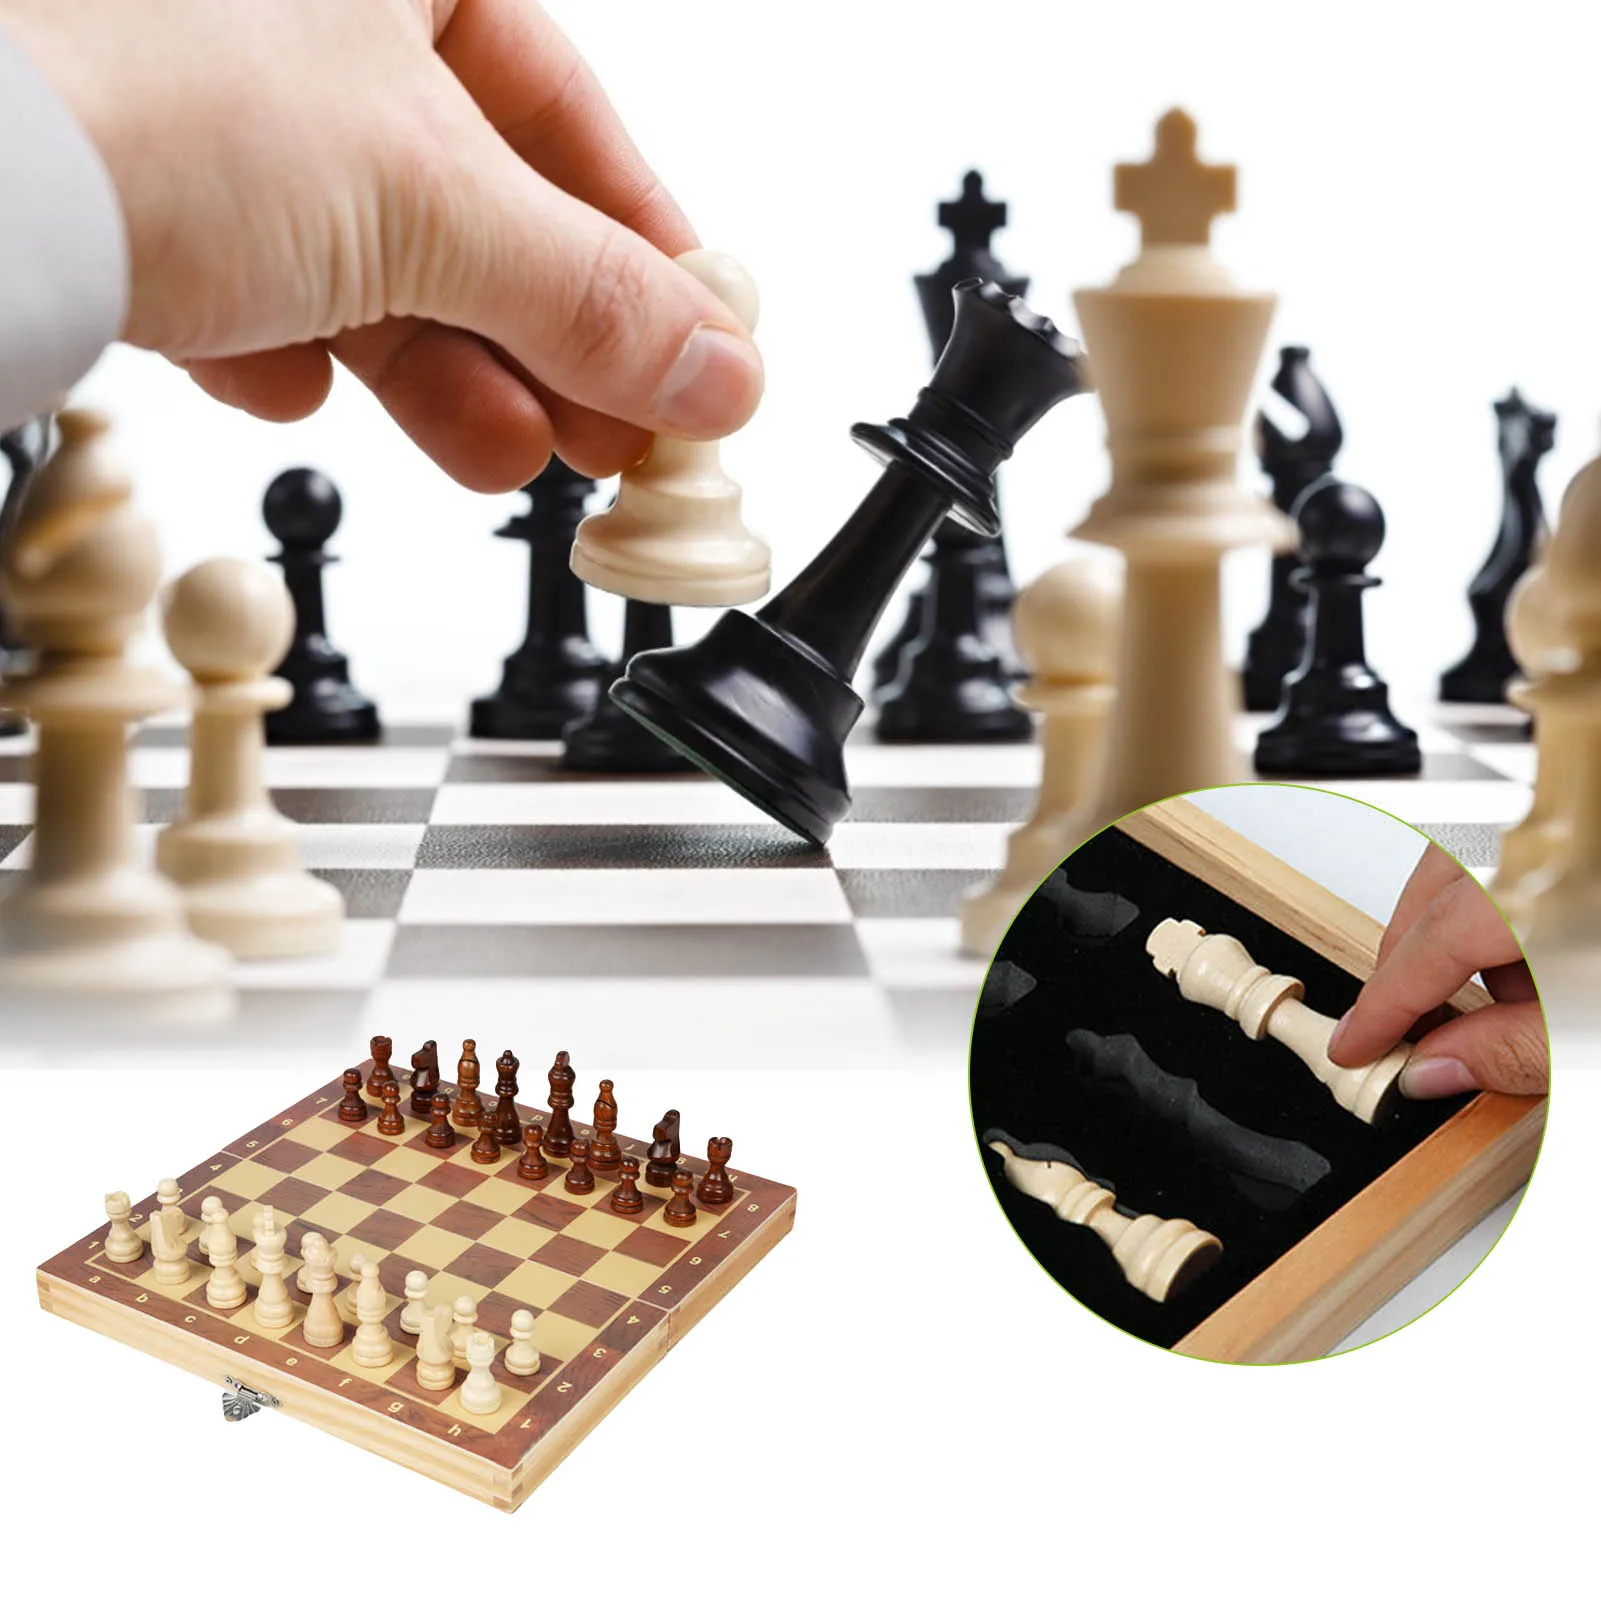 

Folding Magnetic Chess Set With Felted Game Board Interior For Storage Adult Kids Beginner Large Folding Chess Board Checkers